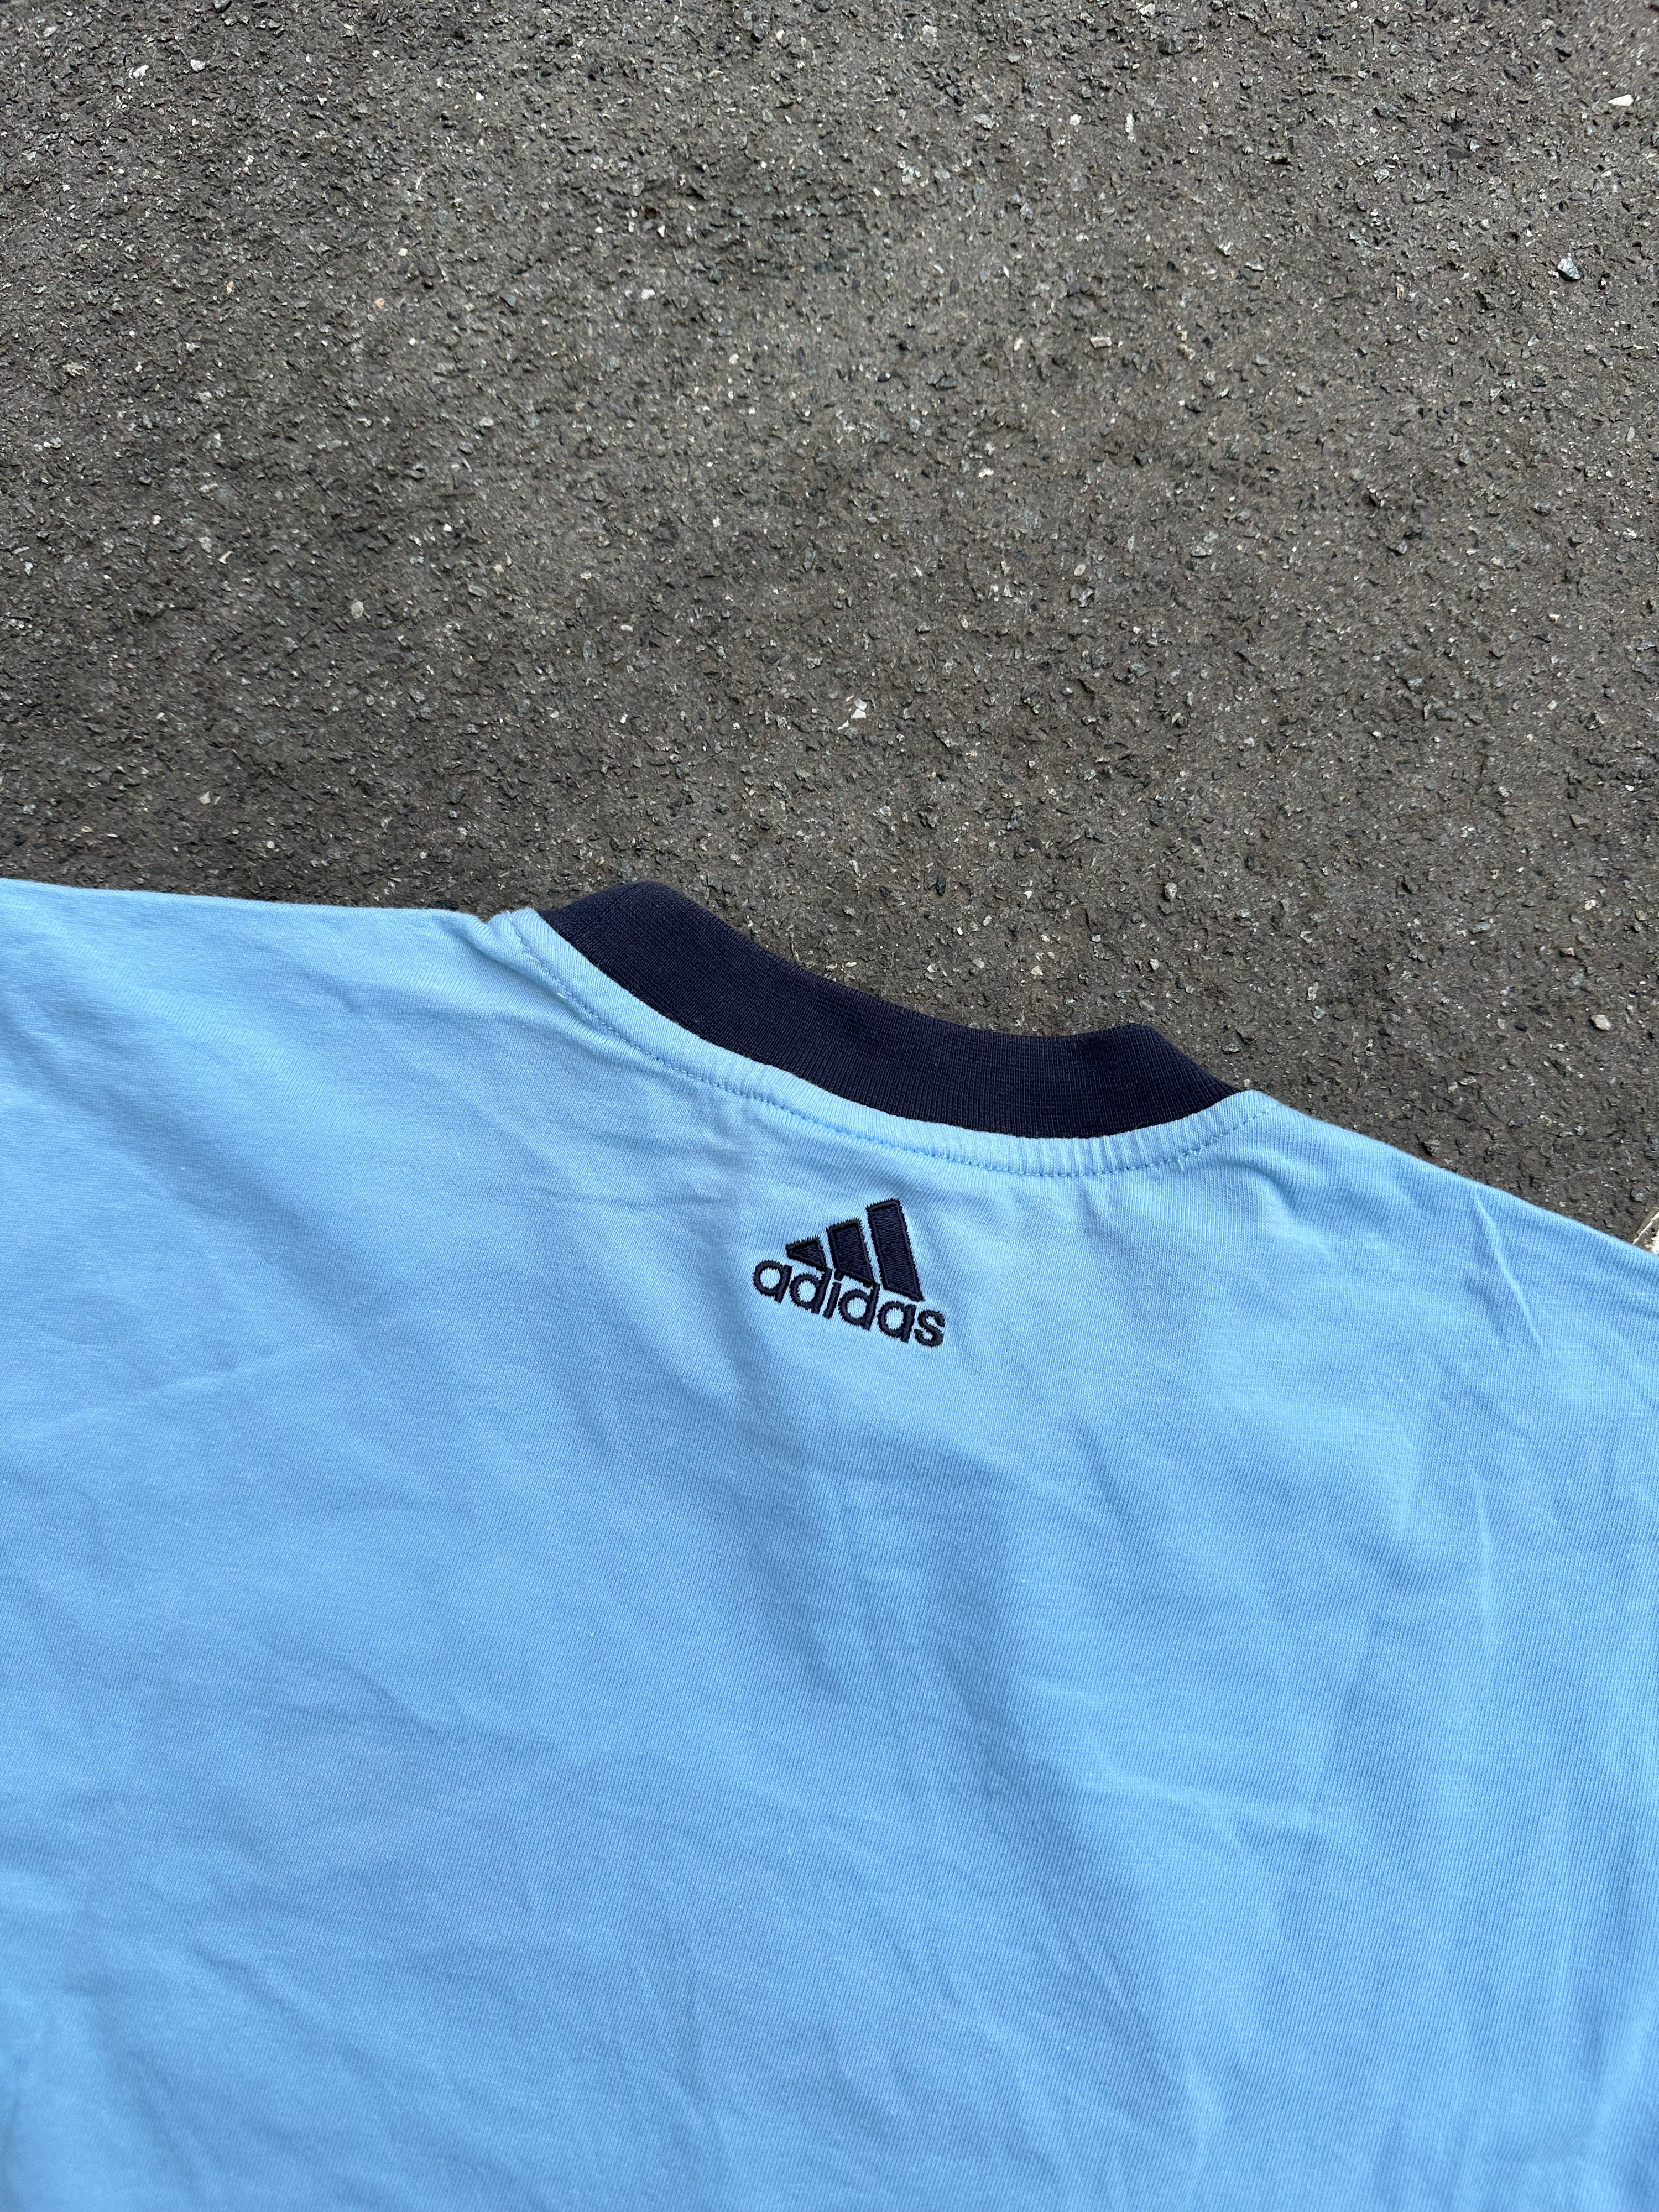 Early 2000s Adidas T-Shirt (L)